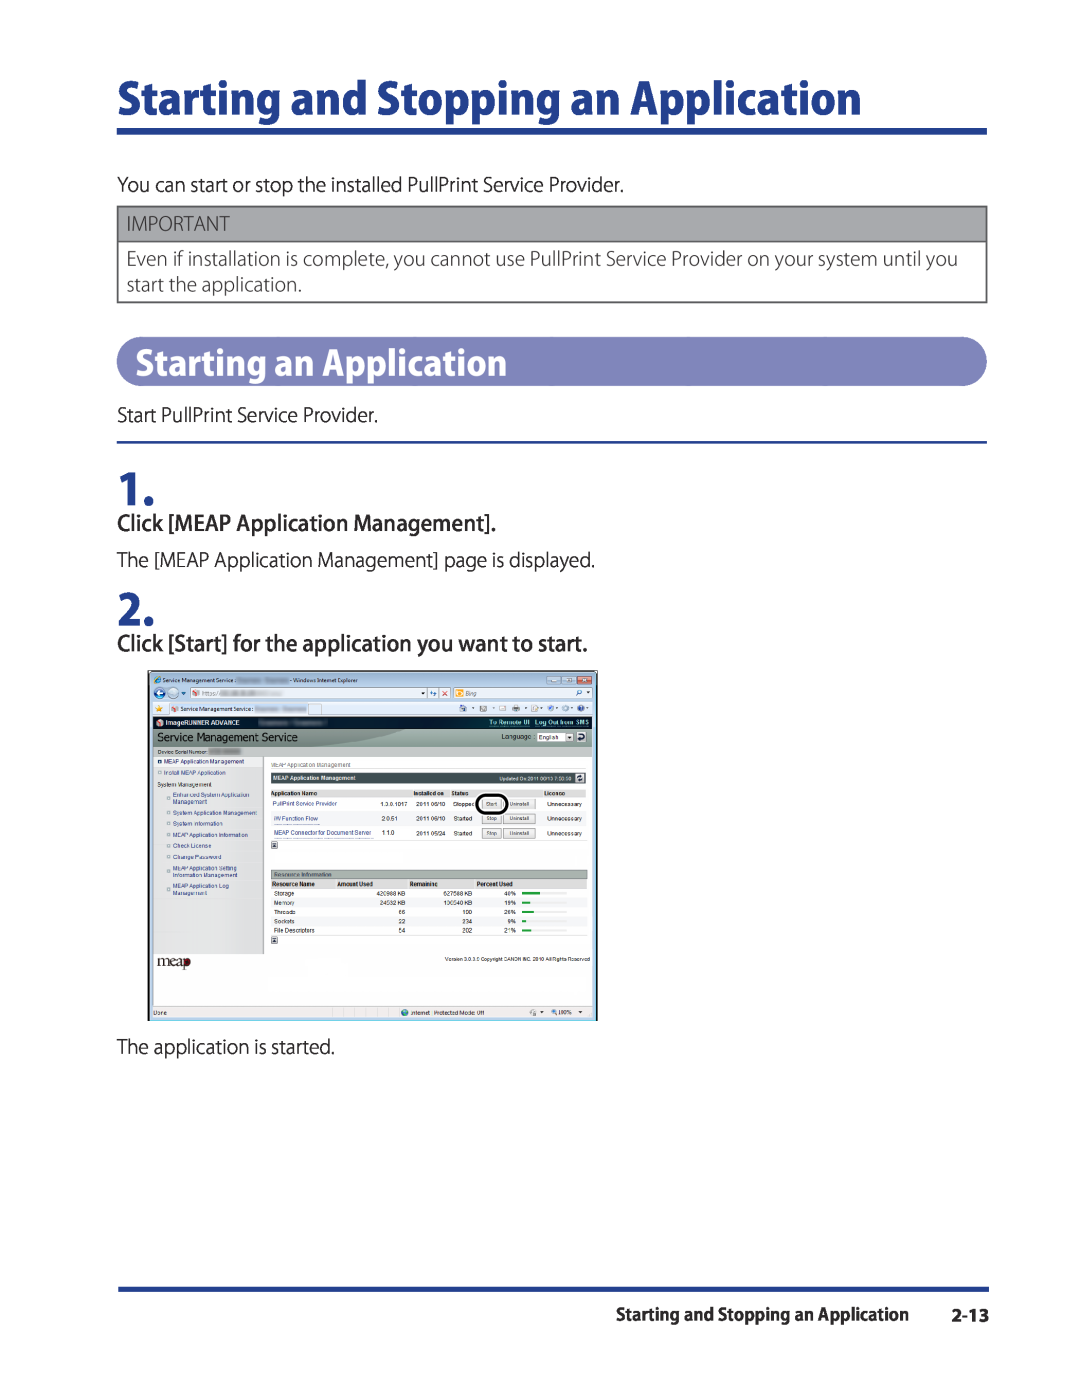 Canon SE-IE-1359-V2 Starting and Stopping an Application, Starting an Application, Click MEAP Application Management, 2-13 